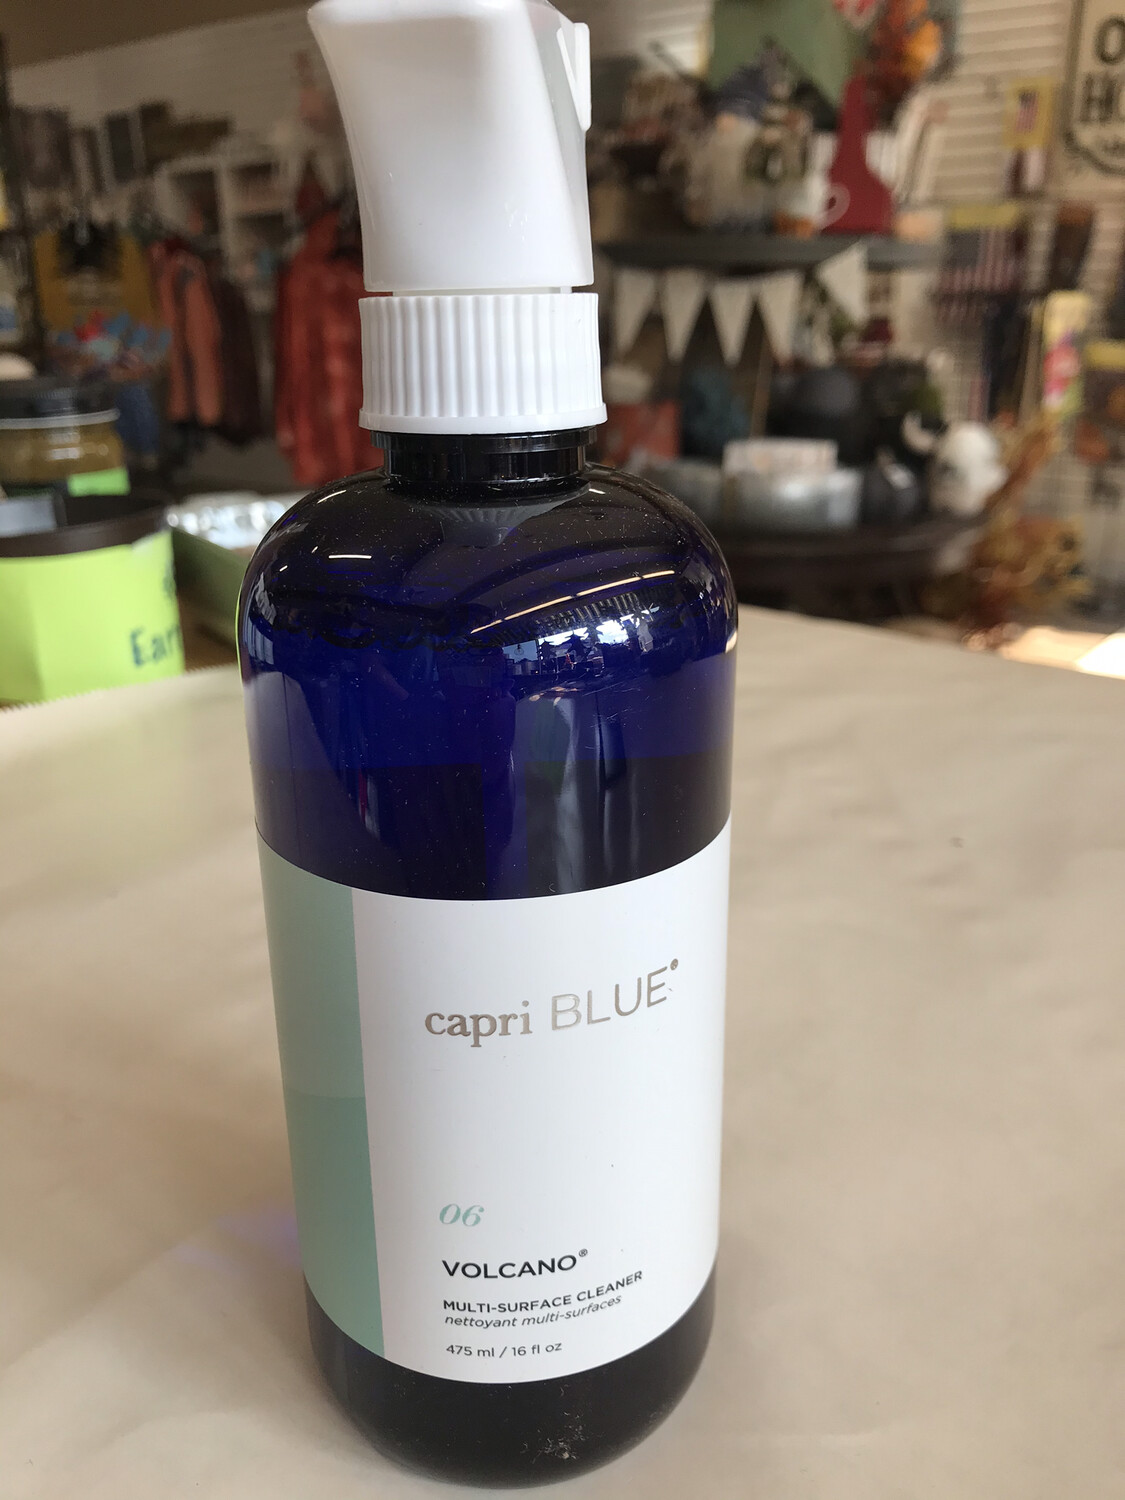 Capri Blue 16 oz. Cleaning Concentrate